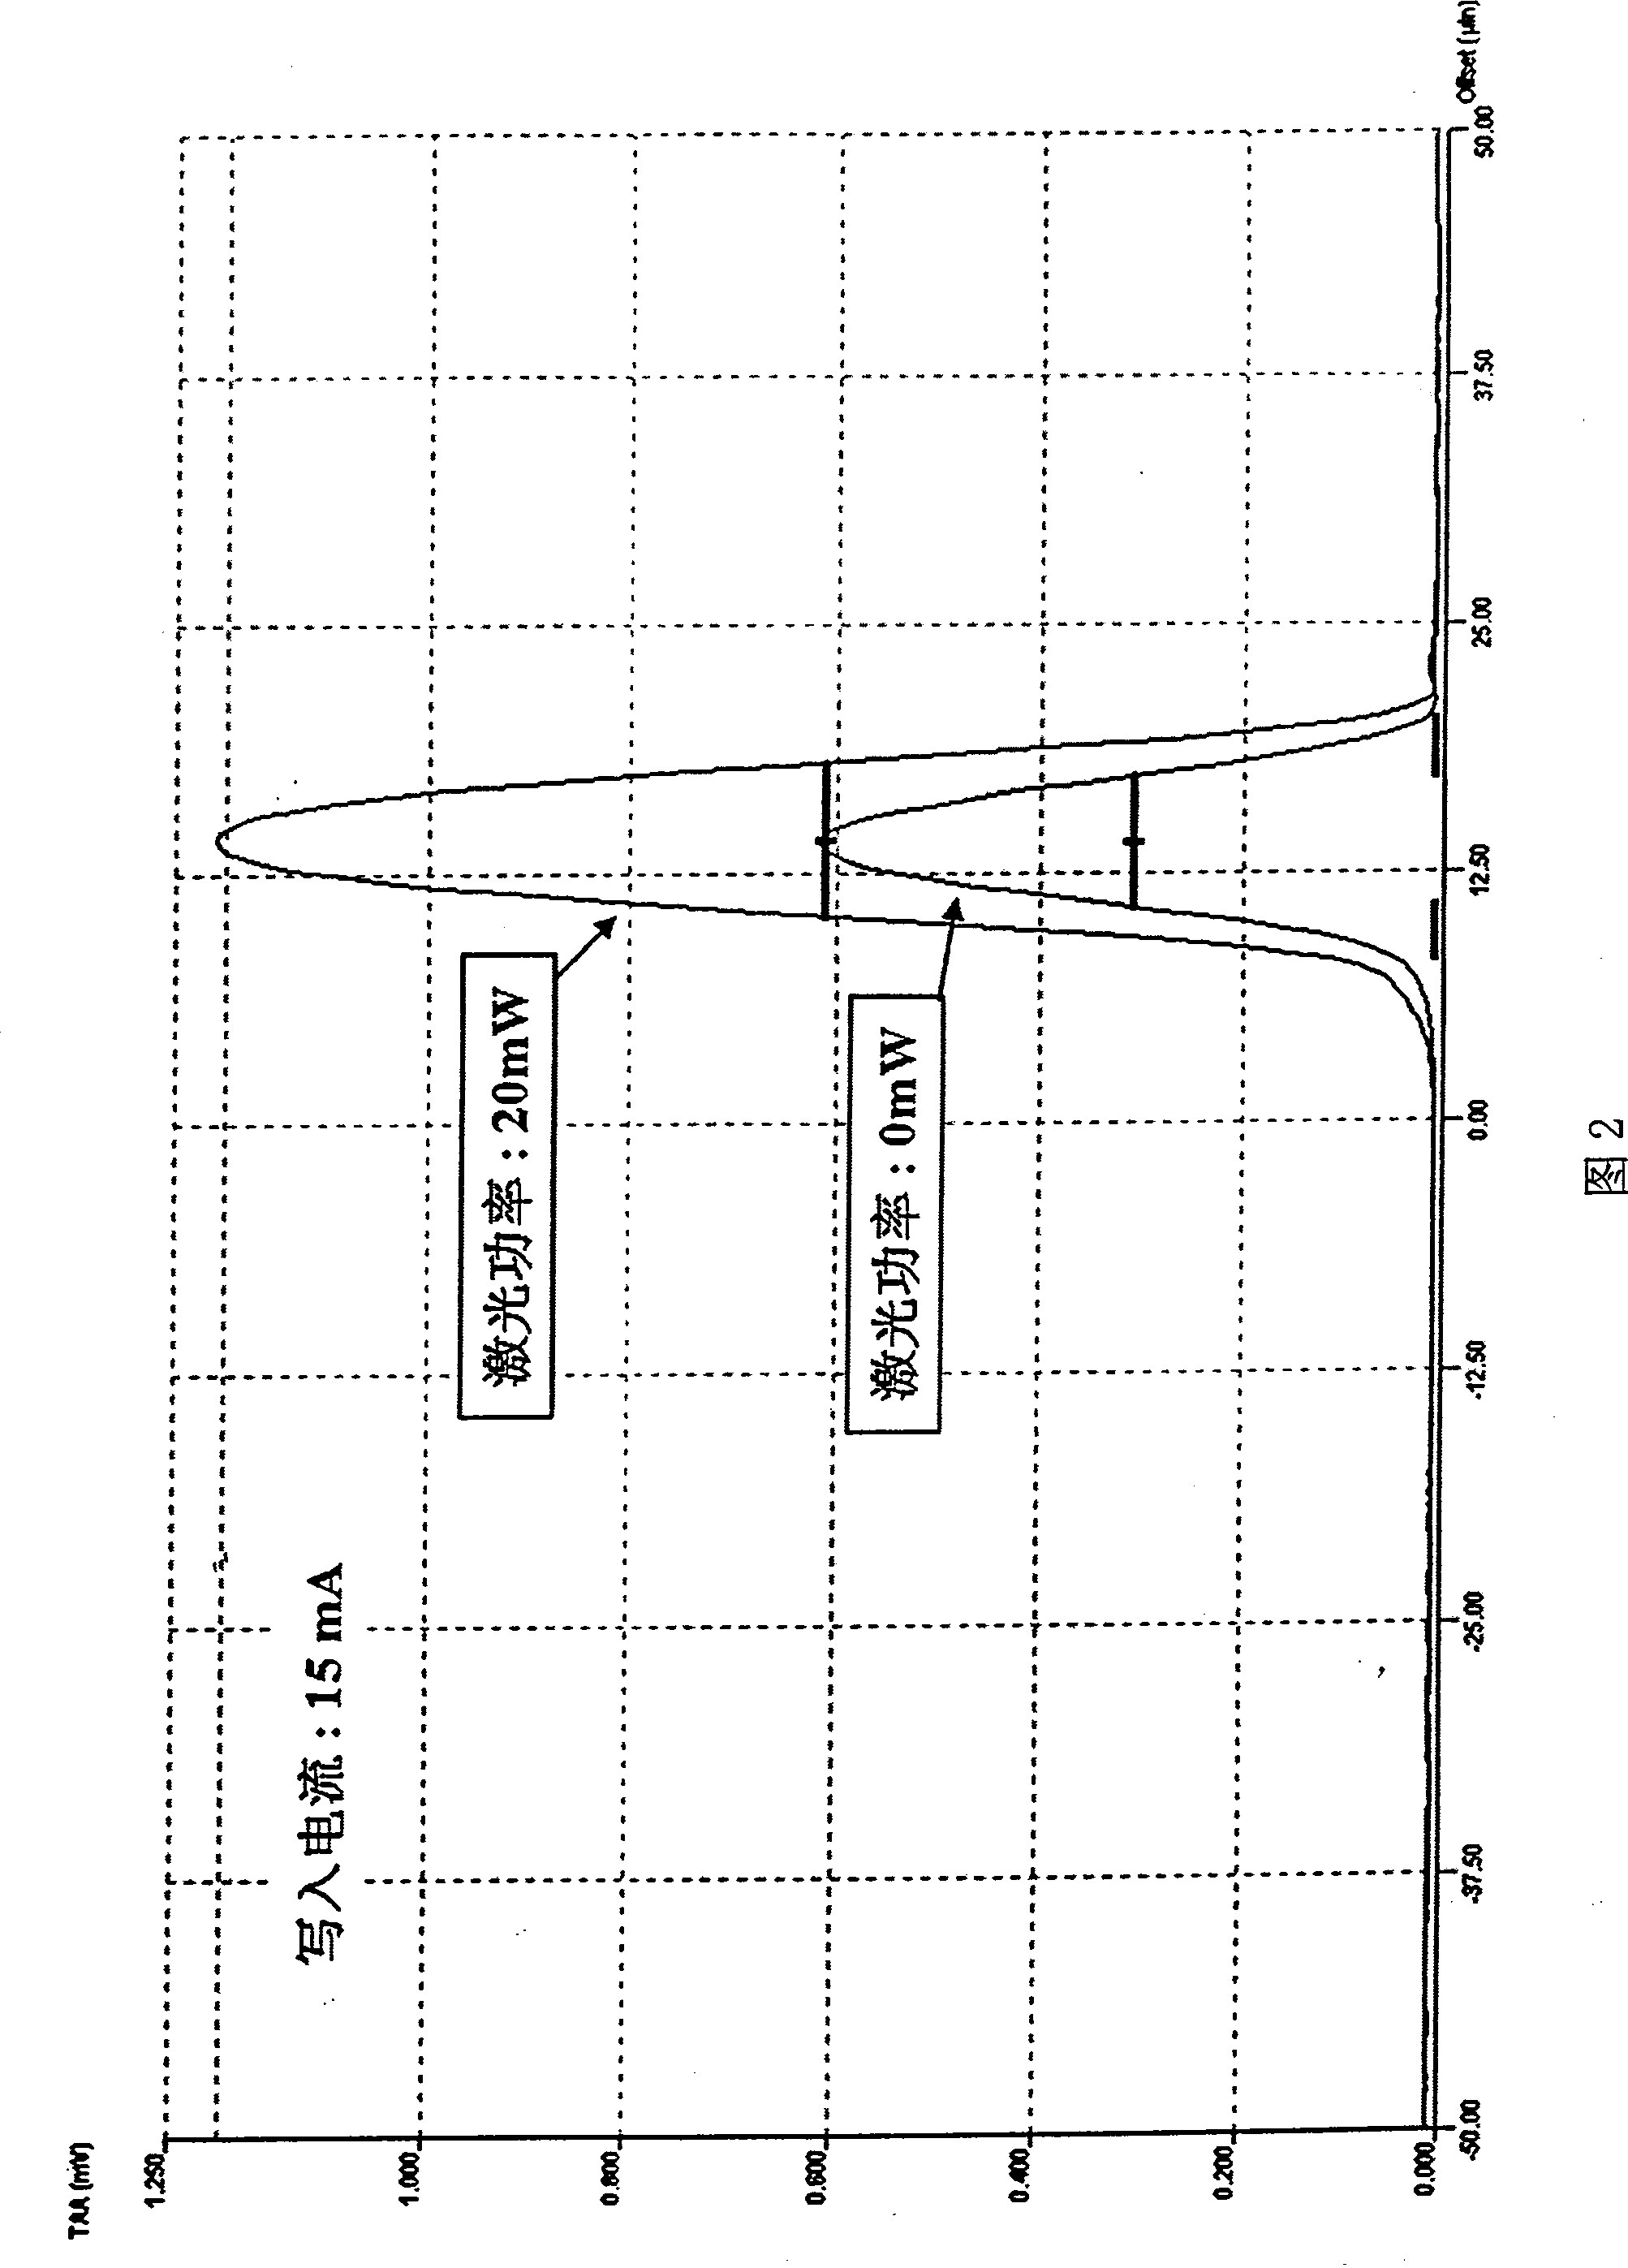 Dynamic storage method onto vertically recording medium magnetic disc by using laser assistant longitudinal magnetic head